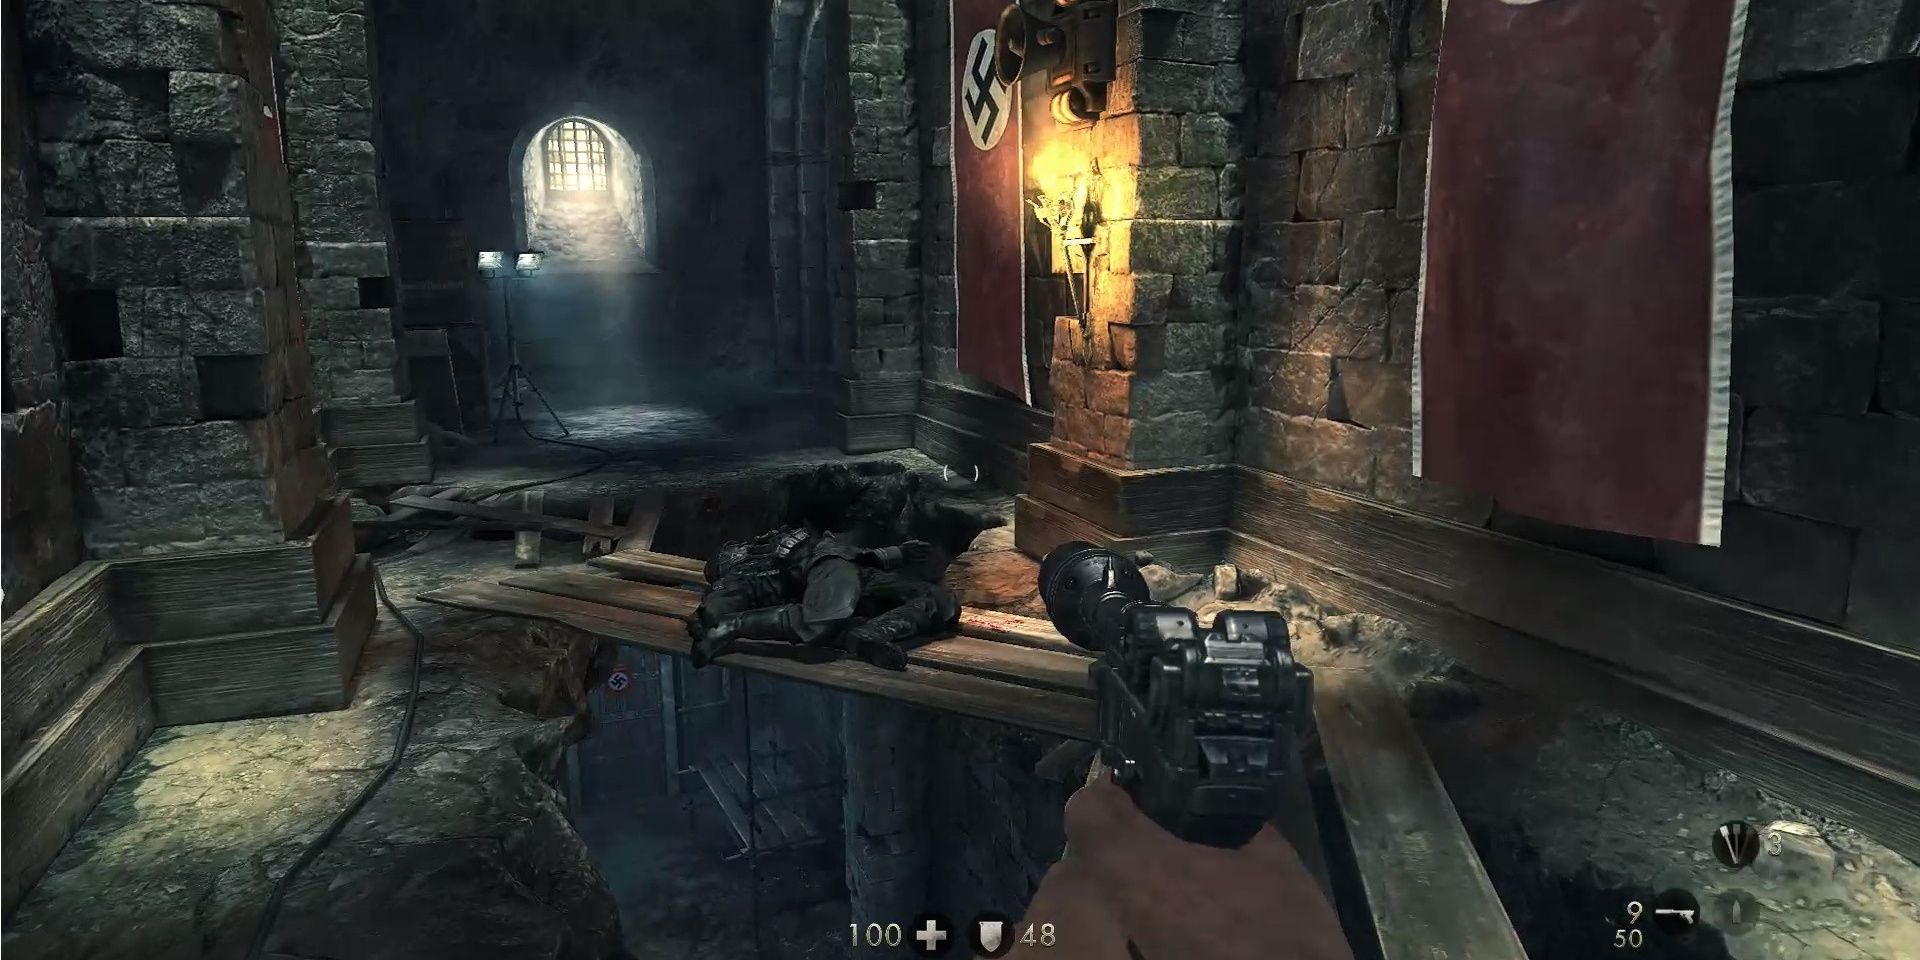 Image of the broken path you must cross in Wolfenstein: The New Order.